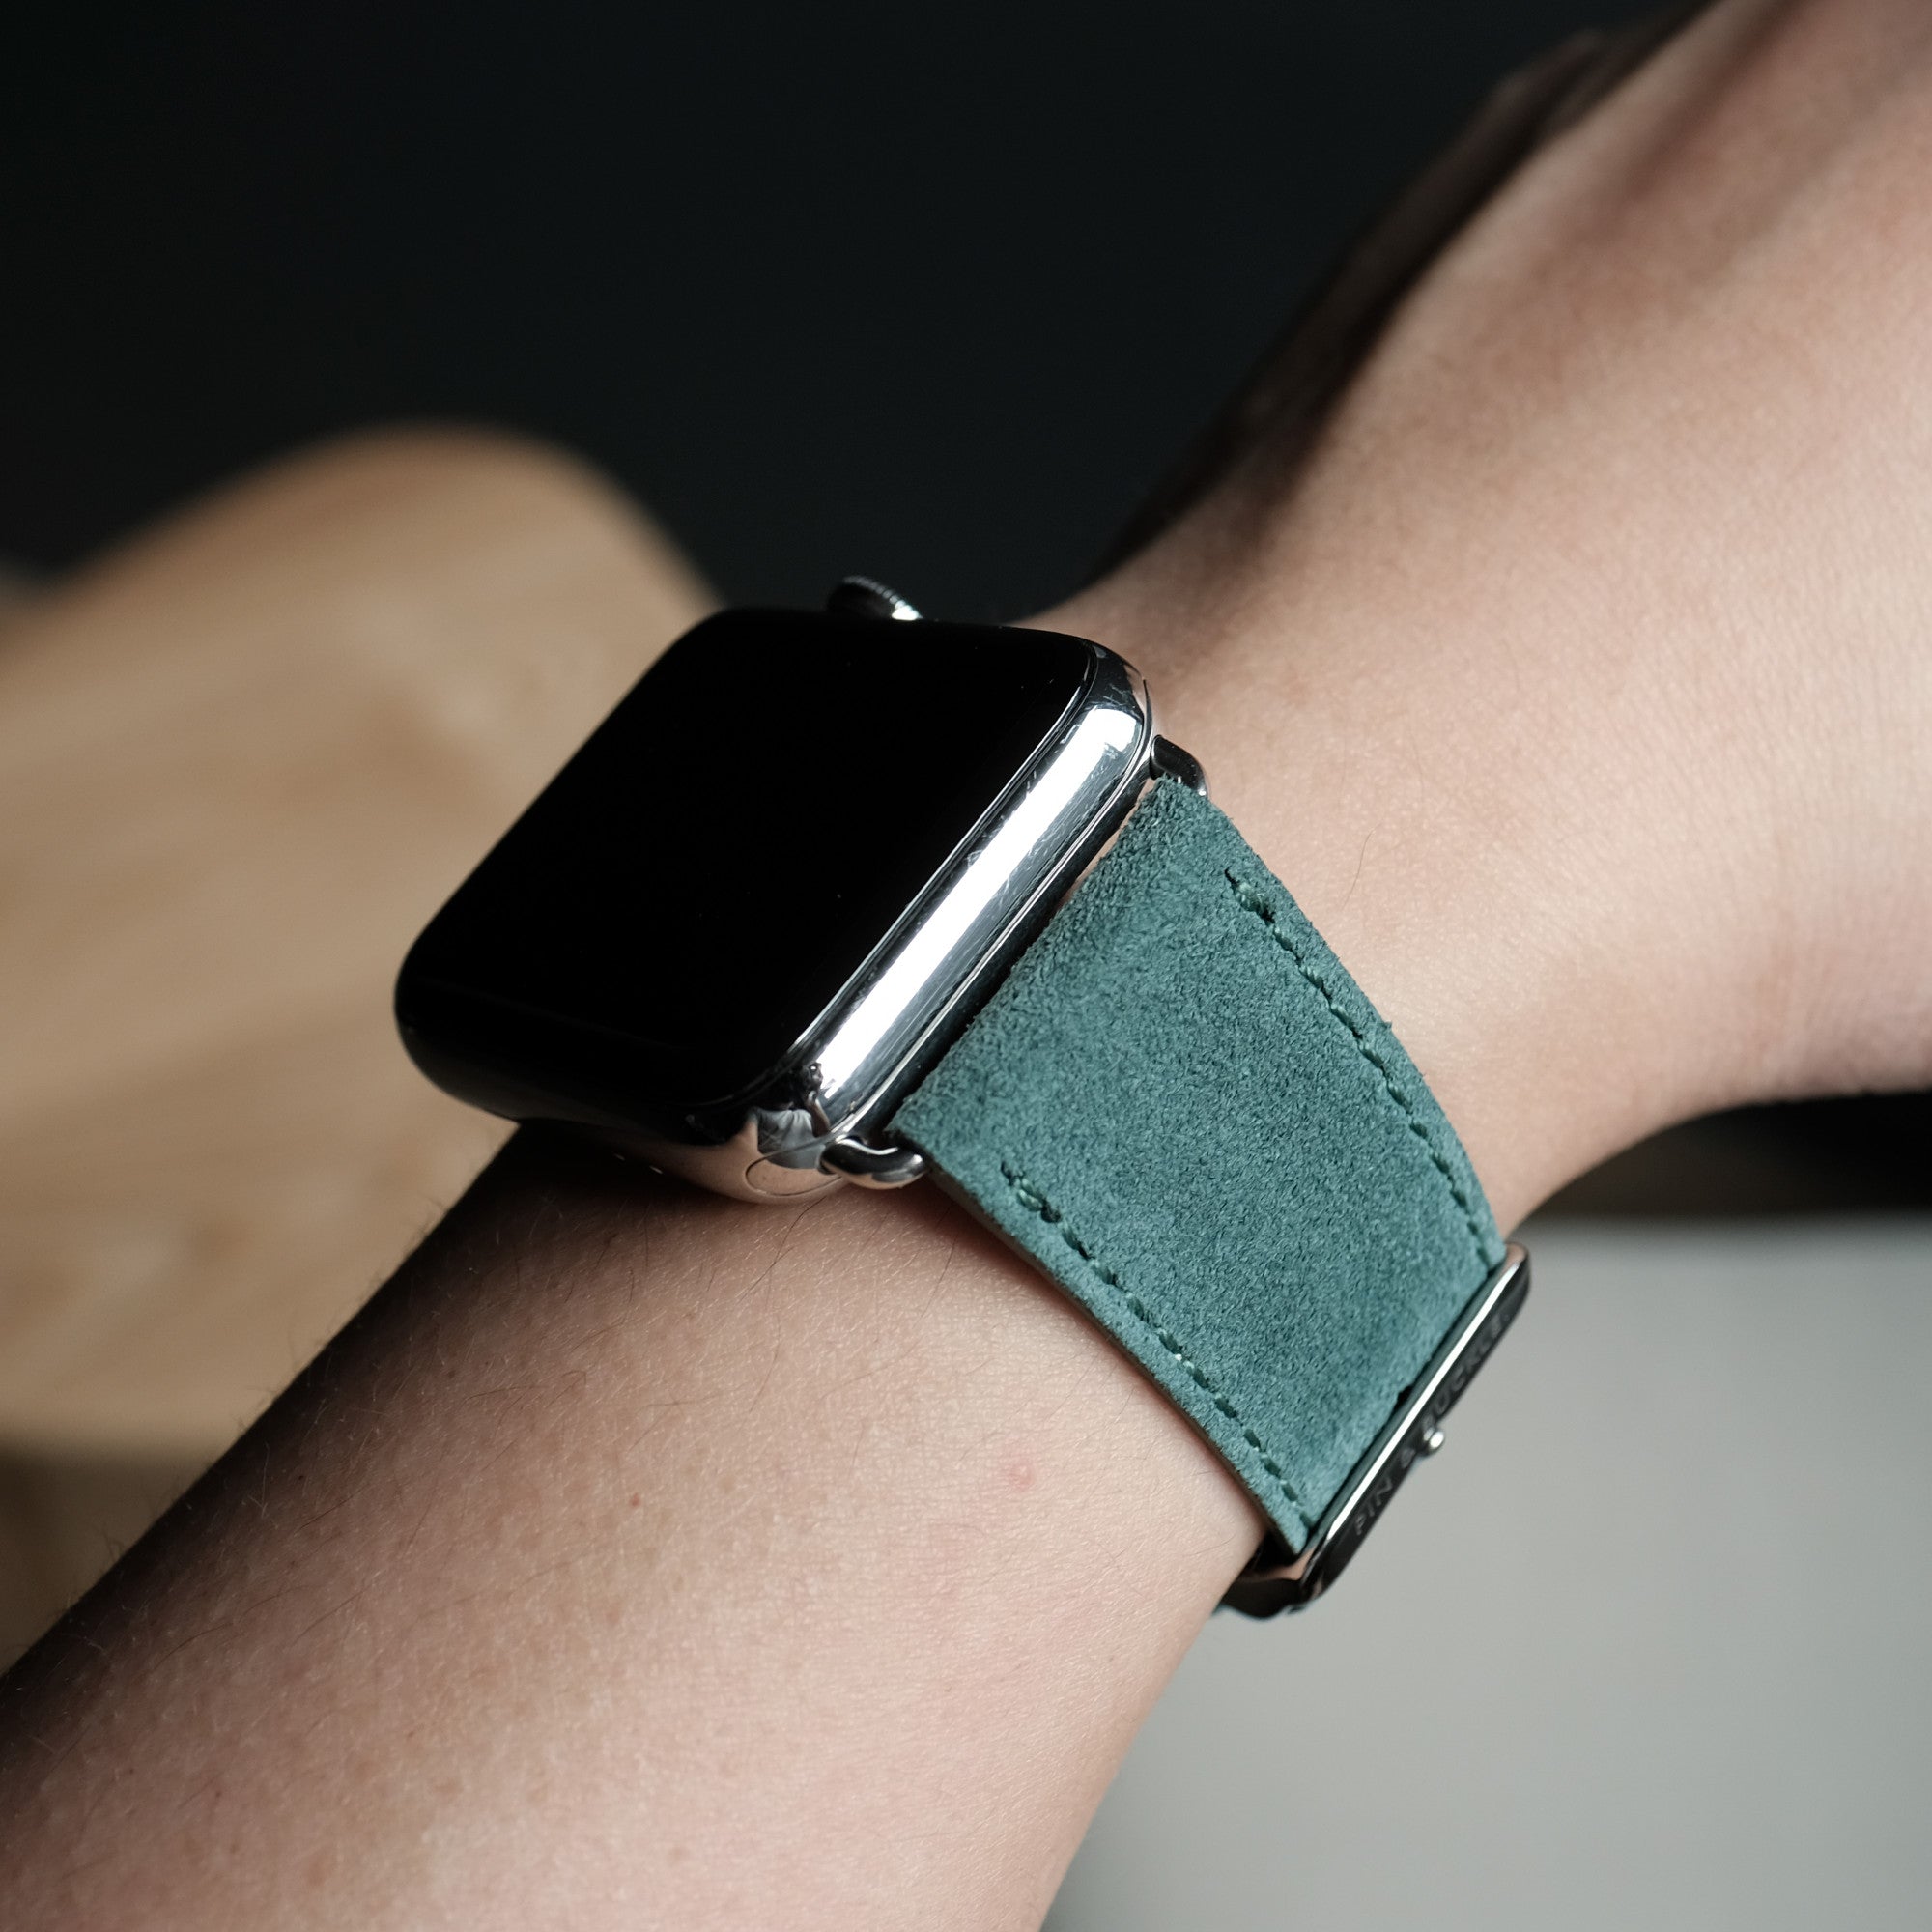 Pin and Buckle Apple Watch Bands - Velour - Suede Leather Apple Watch Band - Pine - on Silver